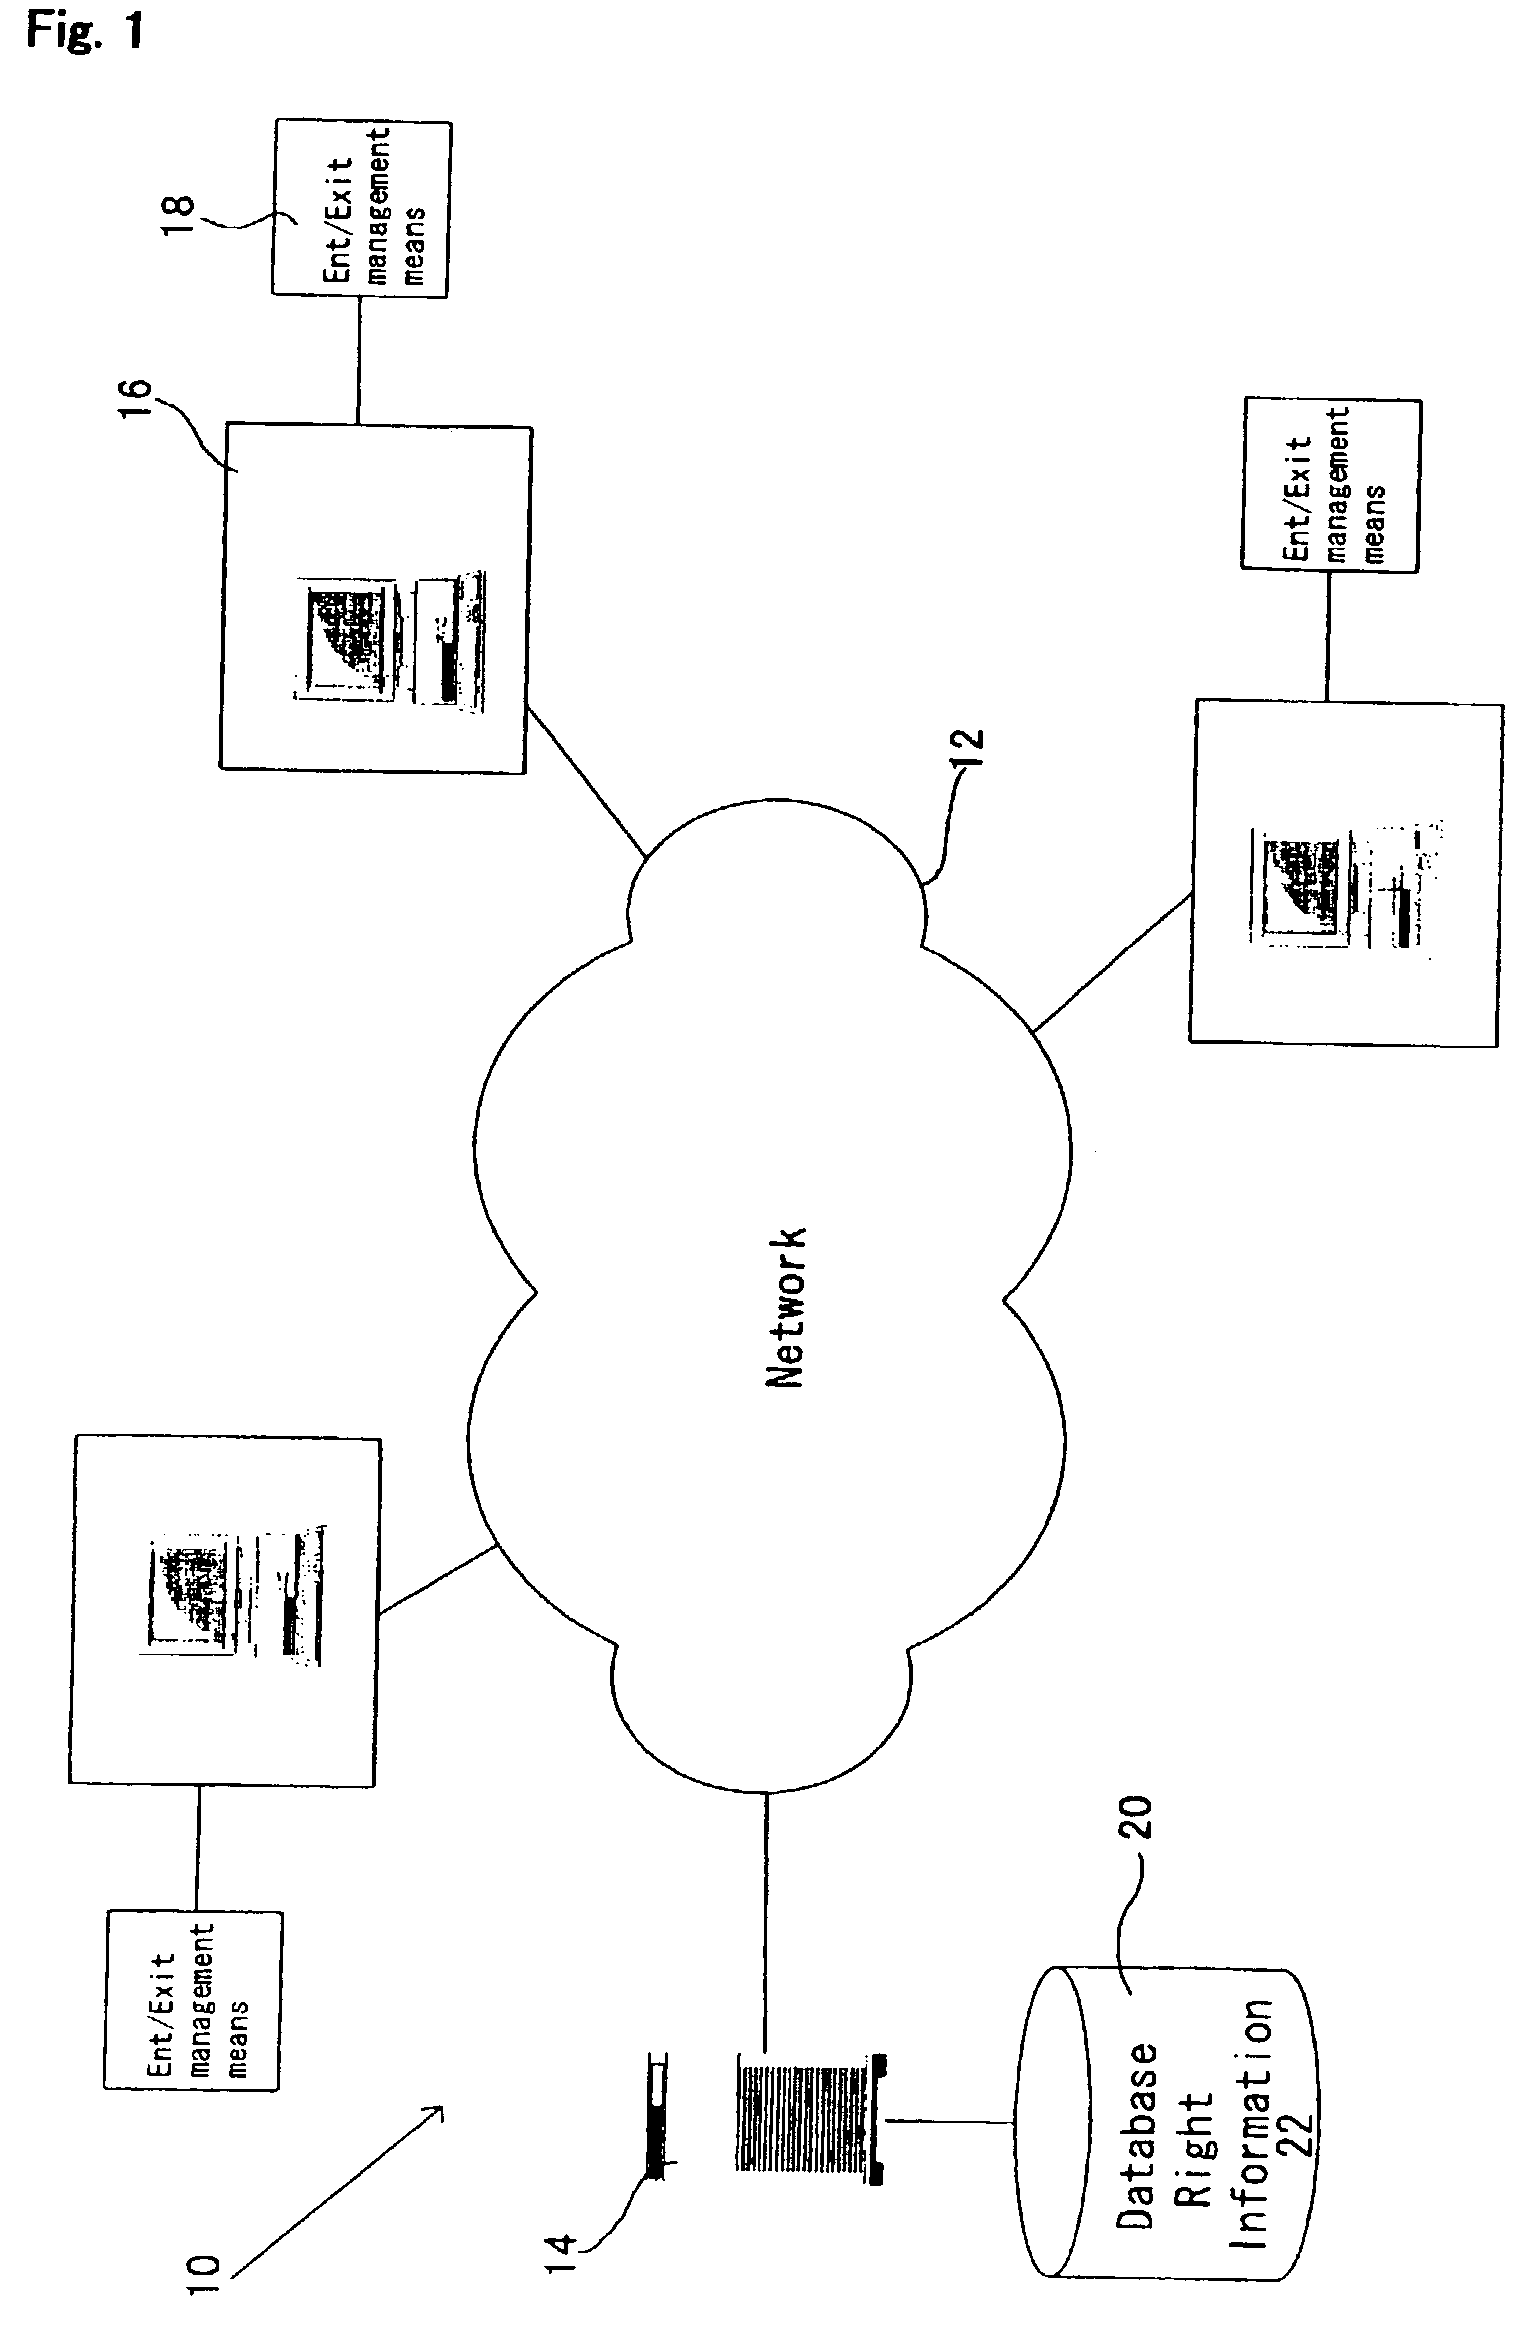 Distributed access control system